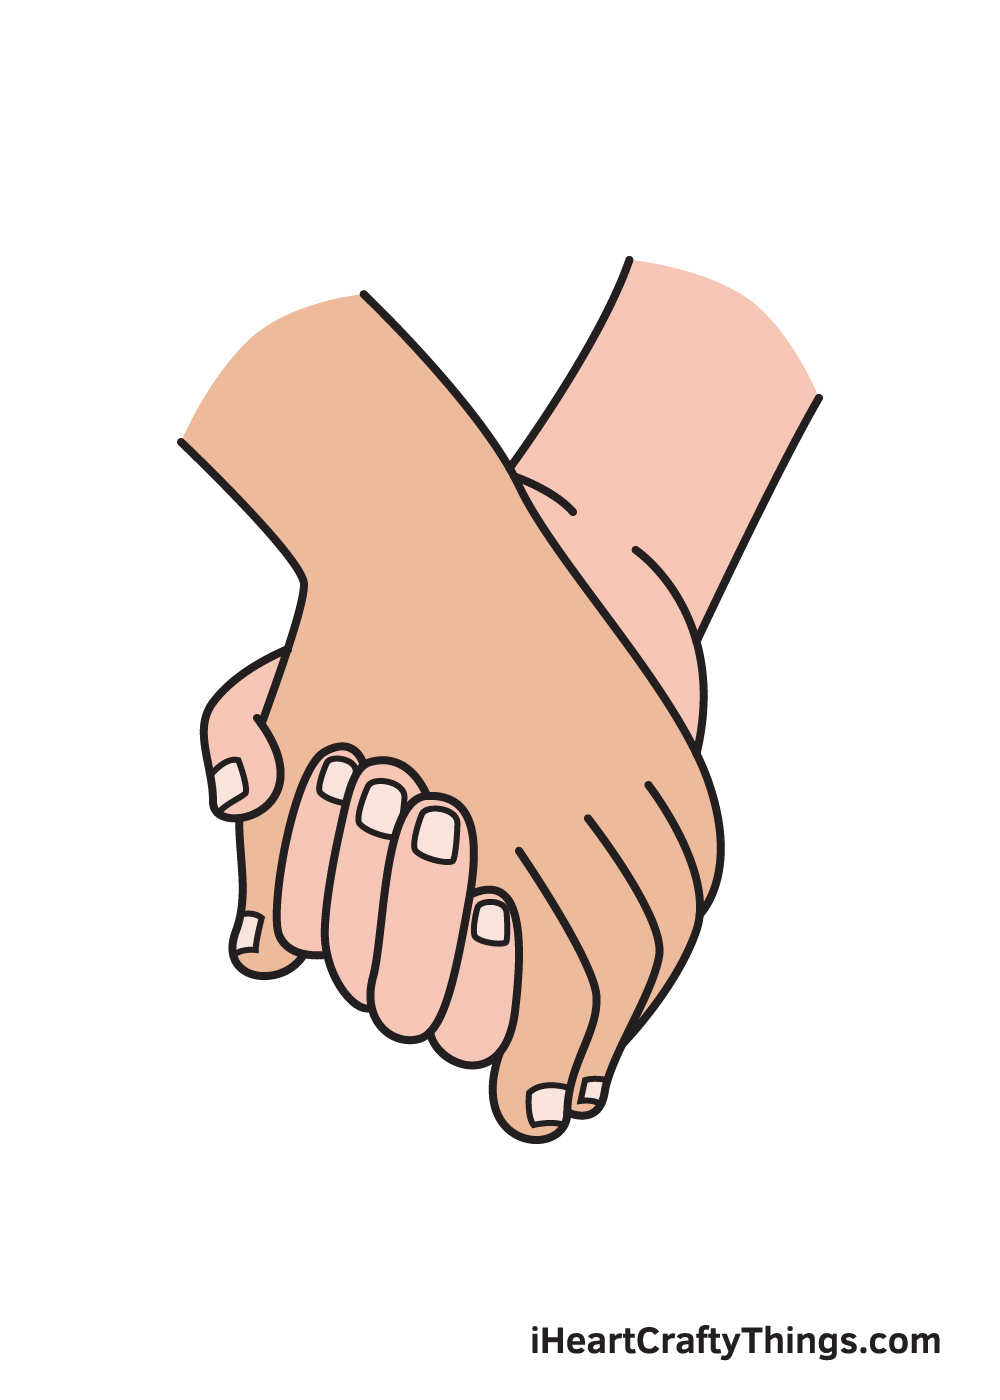 How to Draw Holding Hands – Step by Step Guide